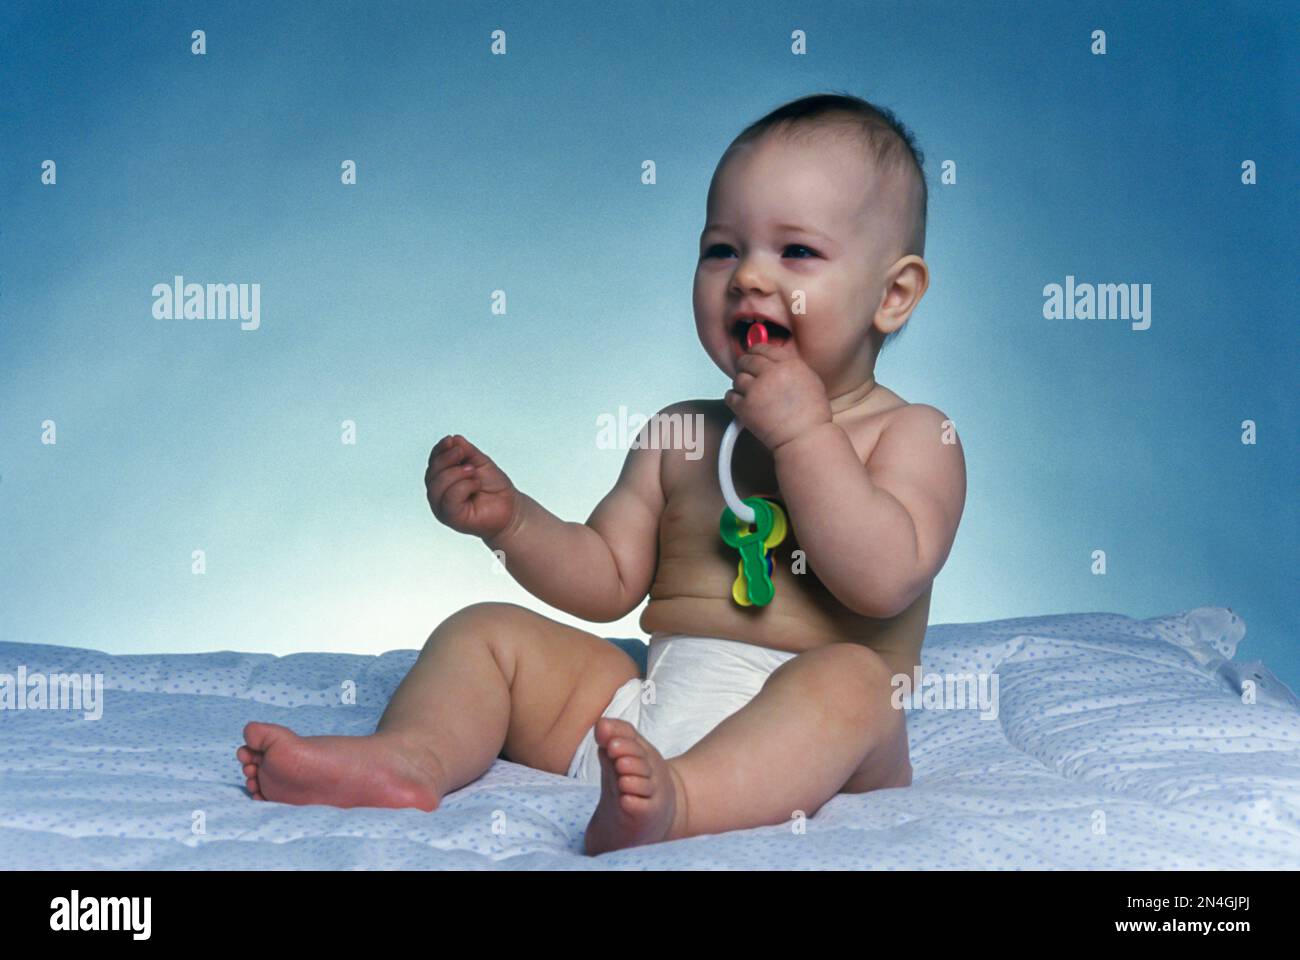 CAUCASIAN INFANT BABY SITTING PLAYING WITH PLASTIC TOY KEYS ON WHITE BLANKET Stock Photo